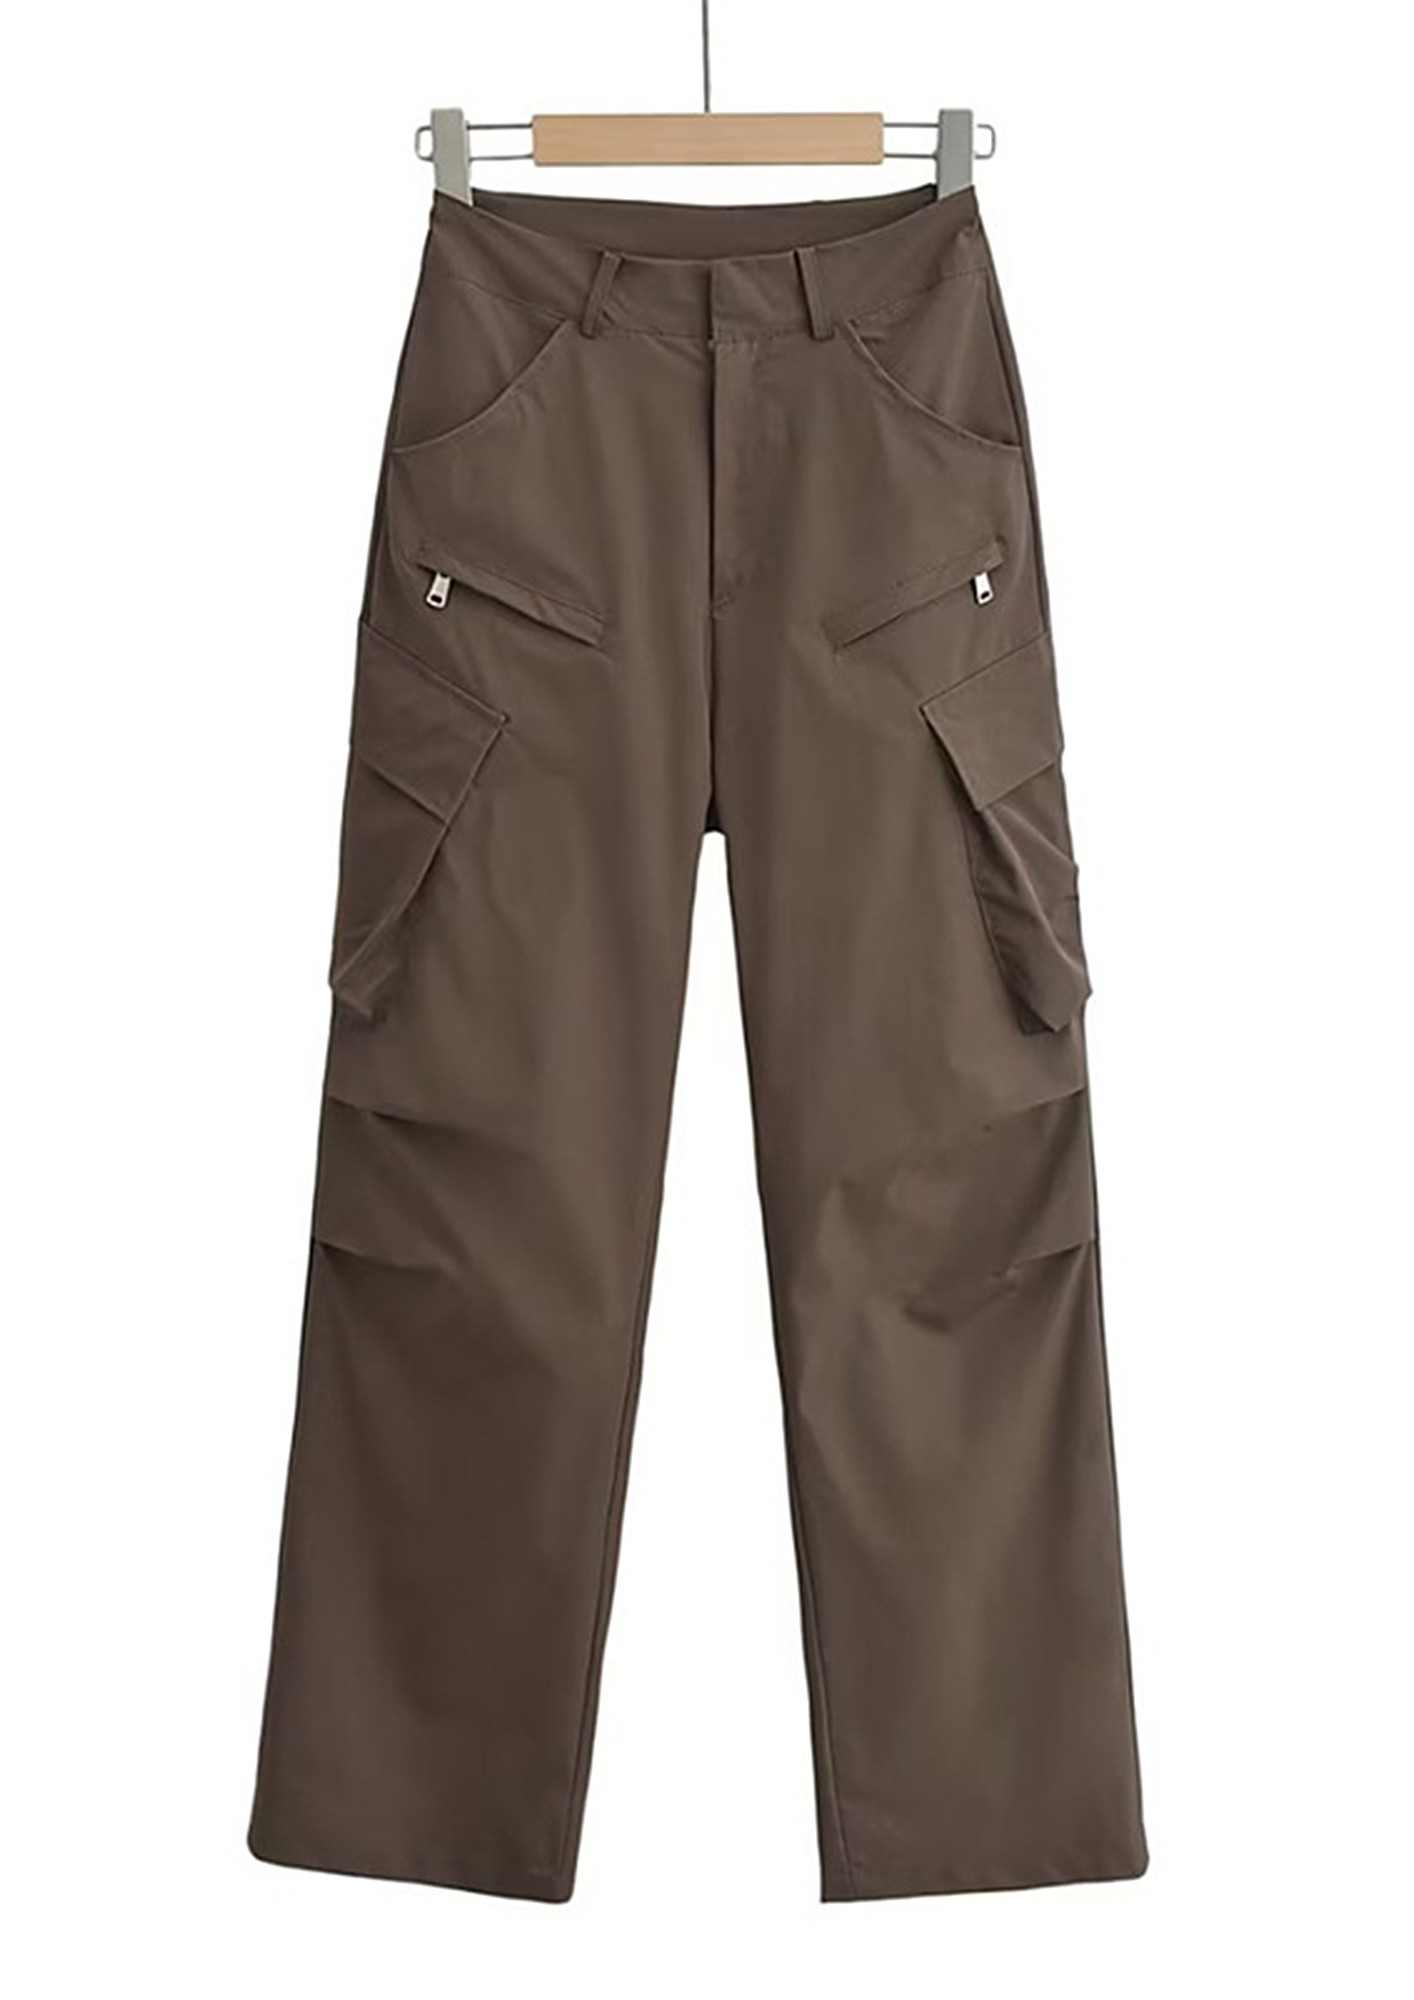 Need some help finding cargo pants online as a 66 dude pls help ideally  something like this  rtall